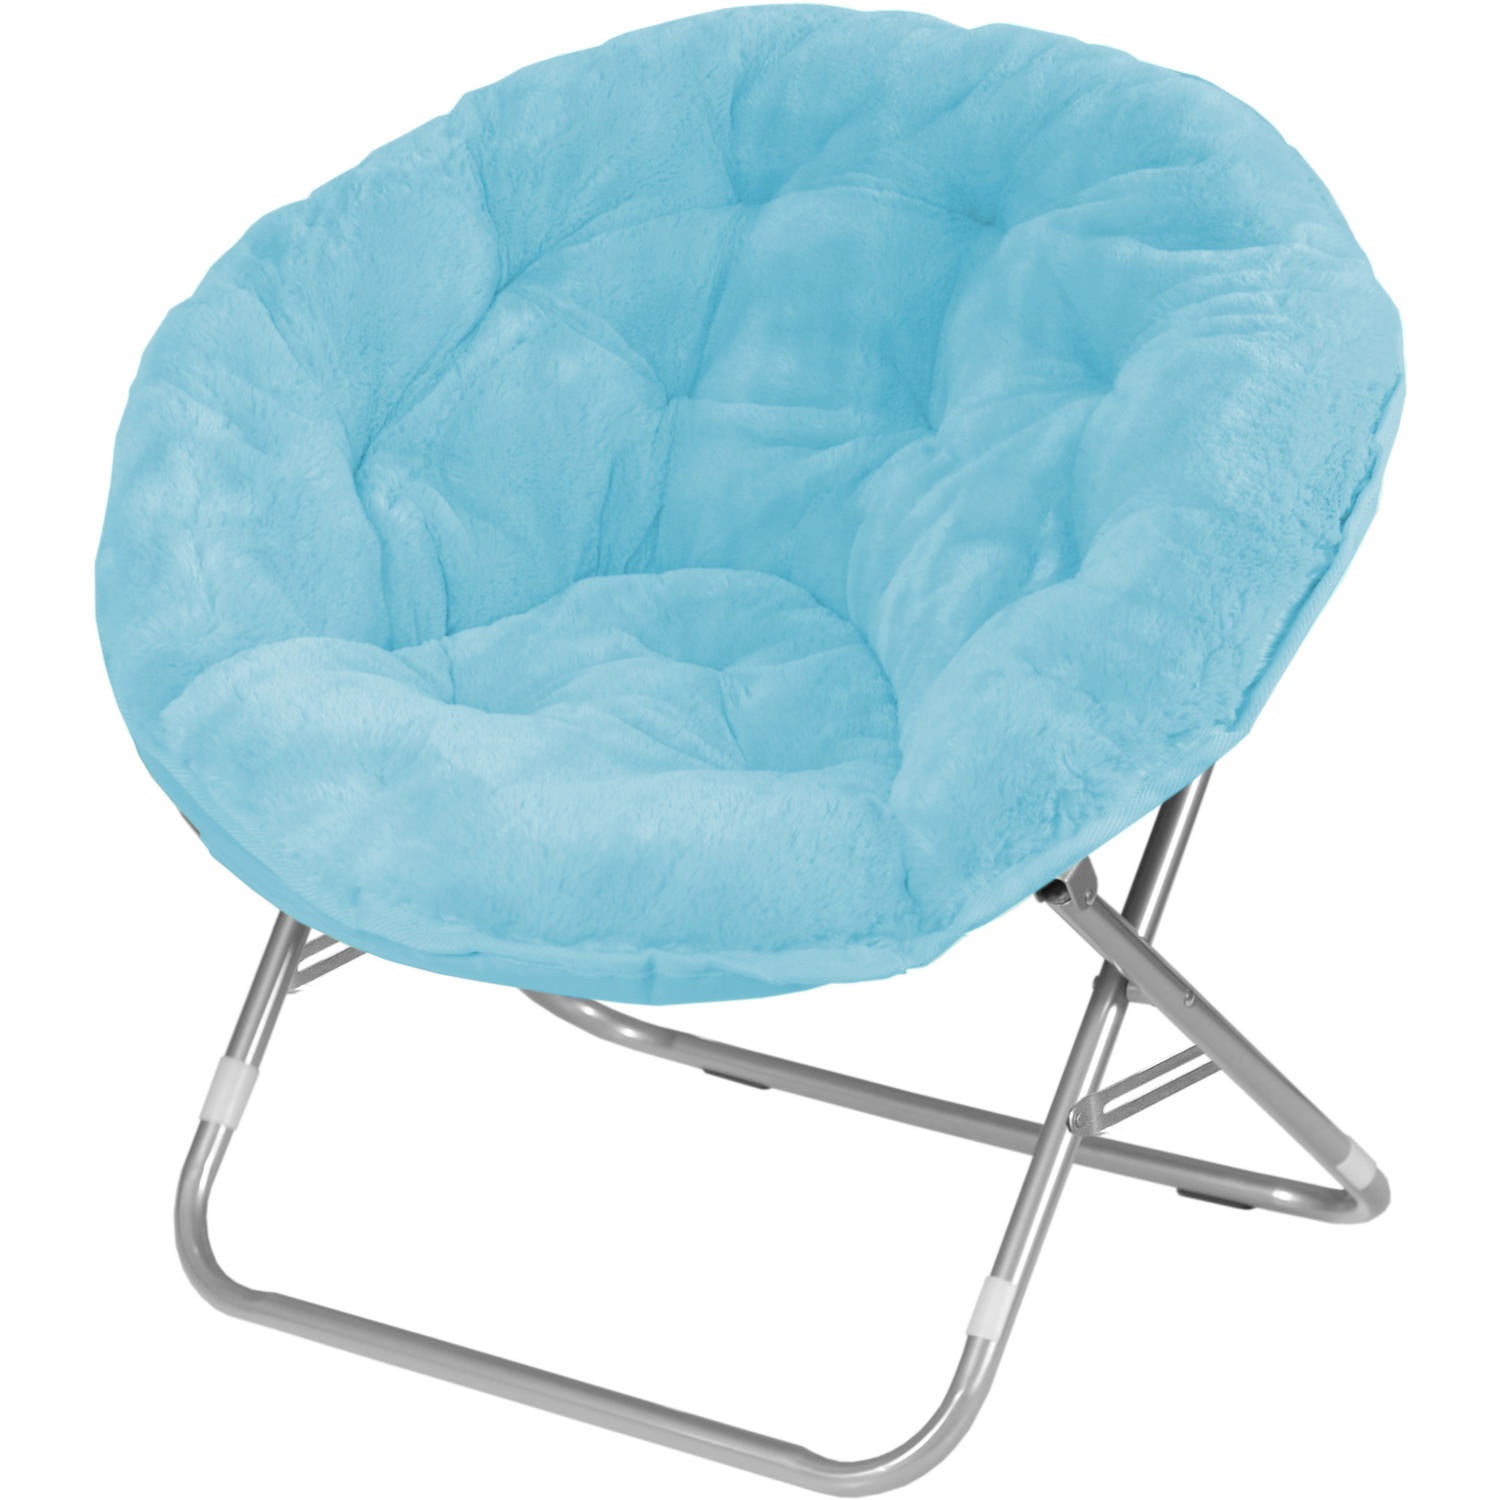 outdoor moon chairs adults